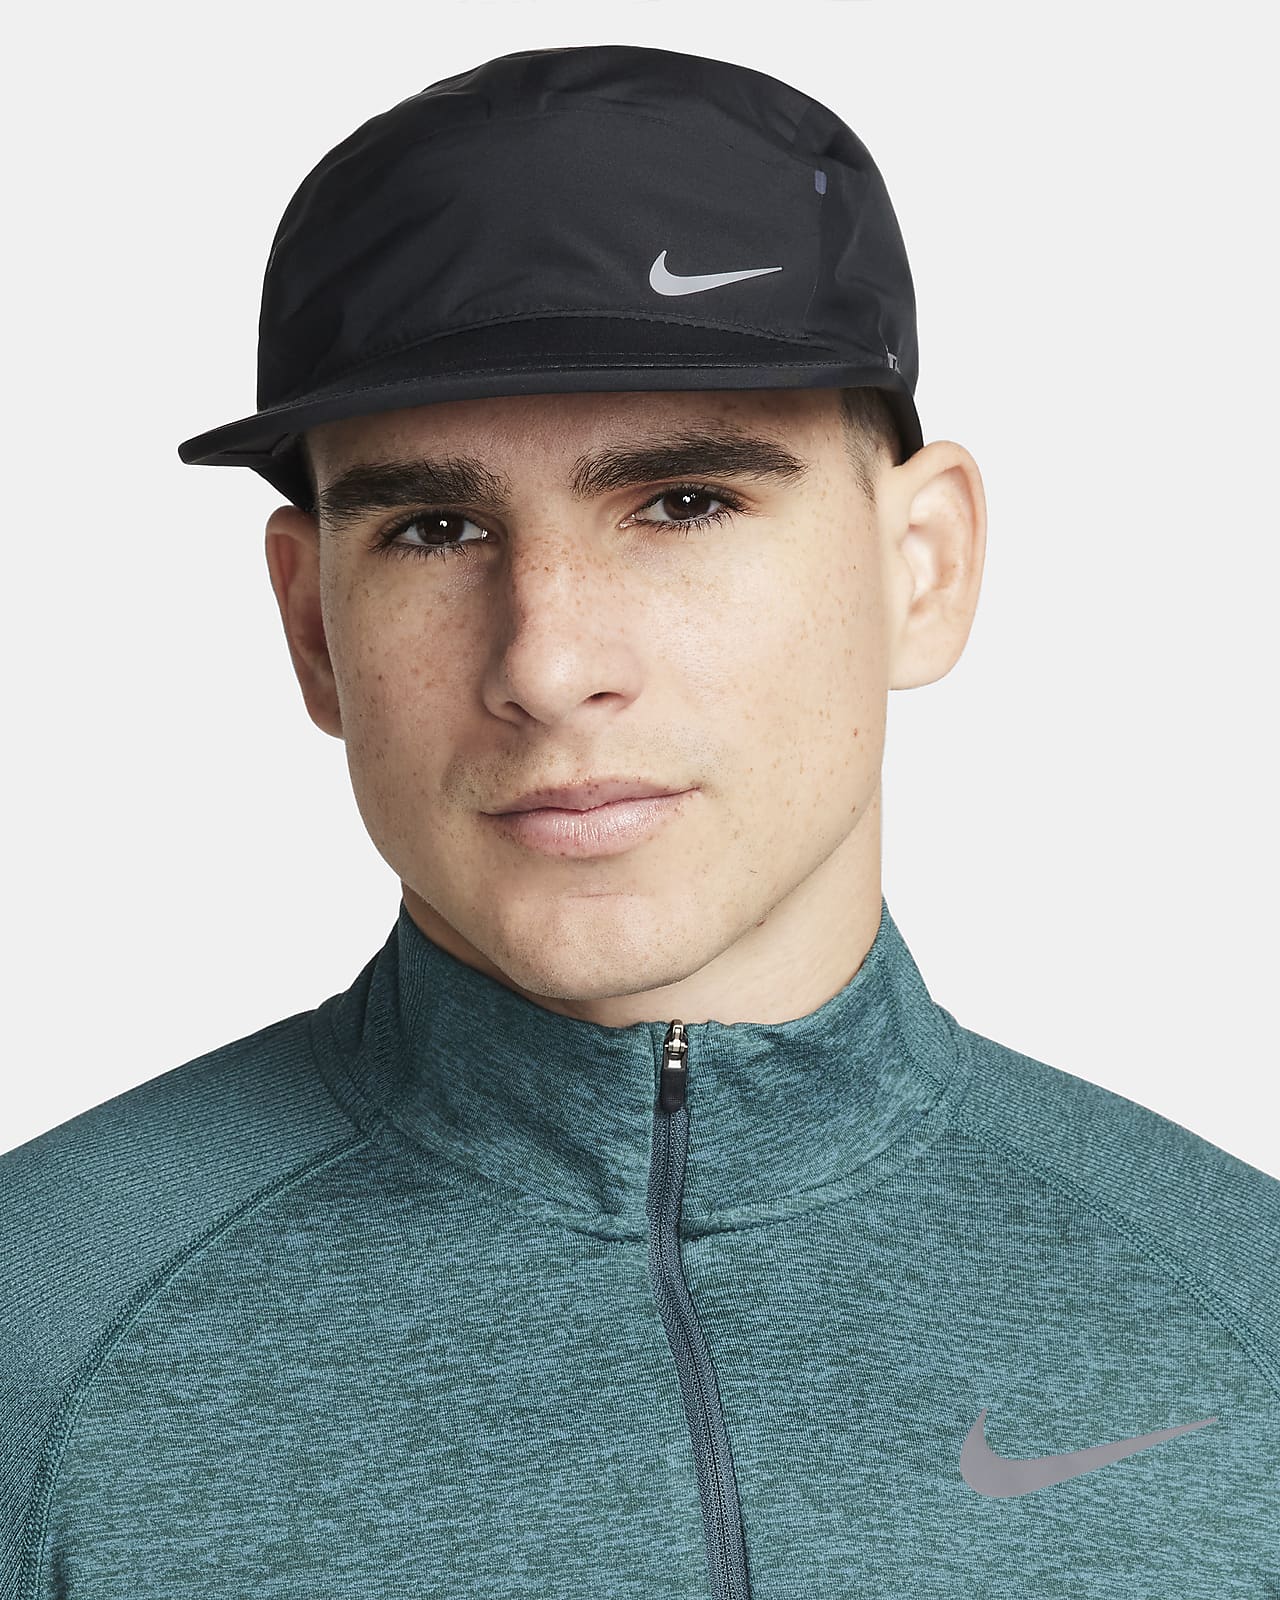 ADV Unstructured Storm-FIT Cap. Fly AeroBill Nike